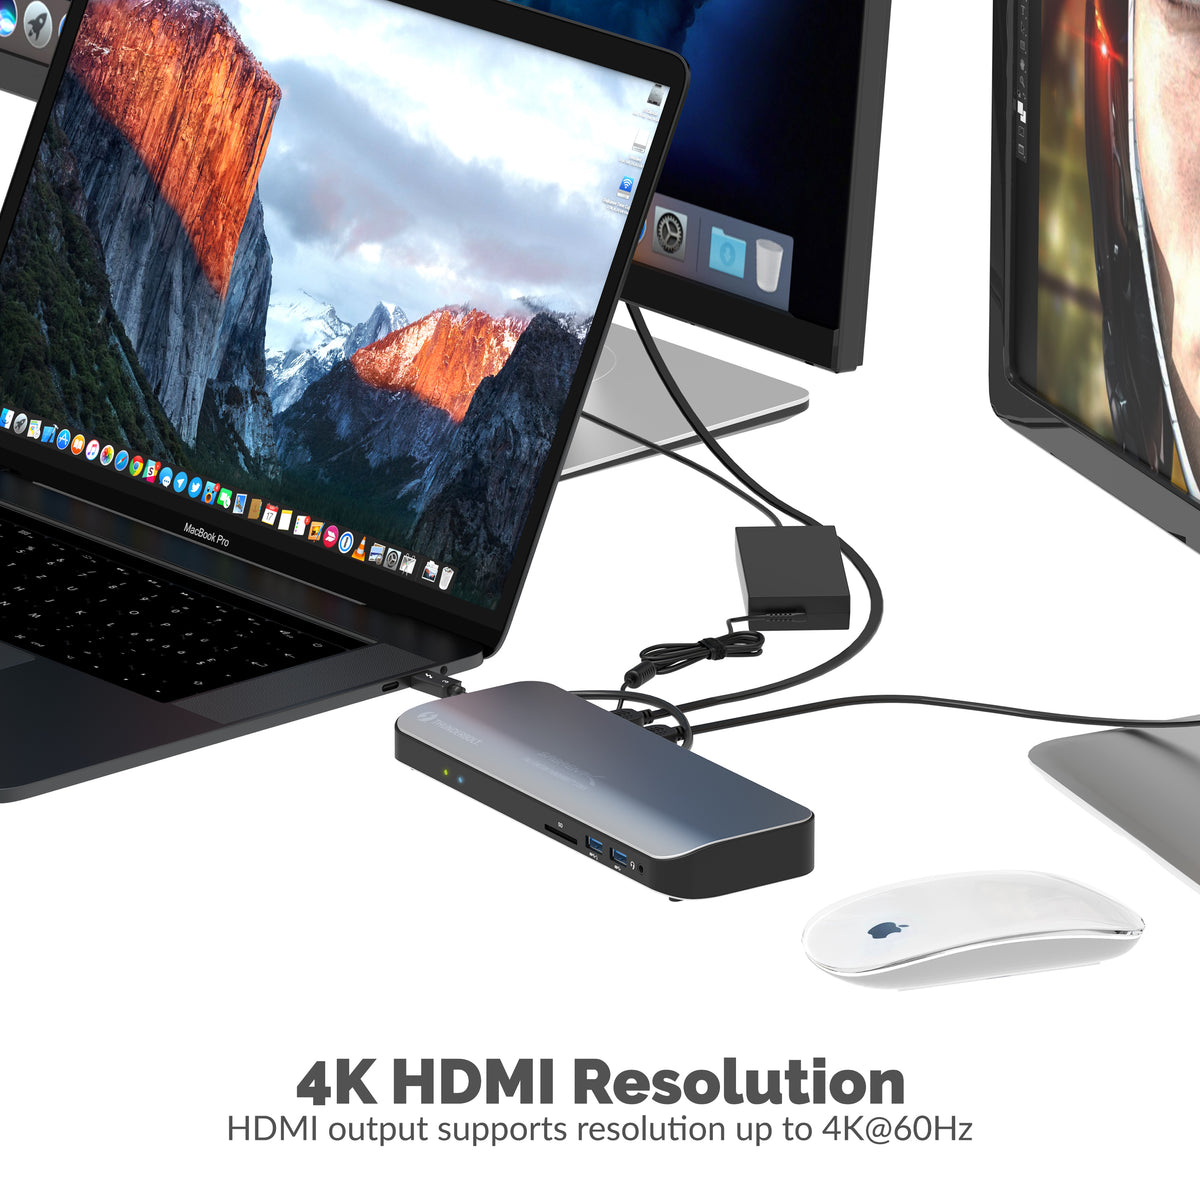 Thunderbolt 3 Docking Station with Power Delivery up to 60W Charging - Dual-4K Display